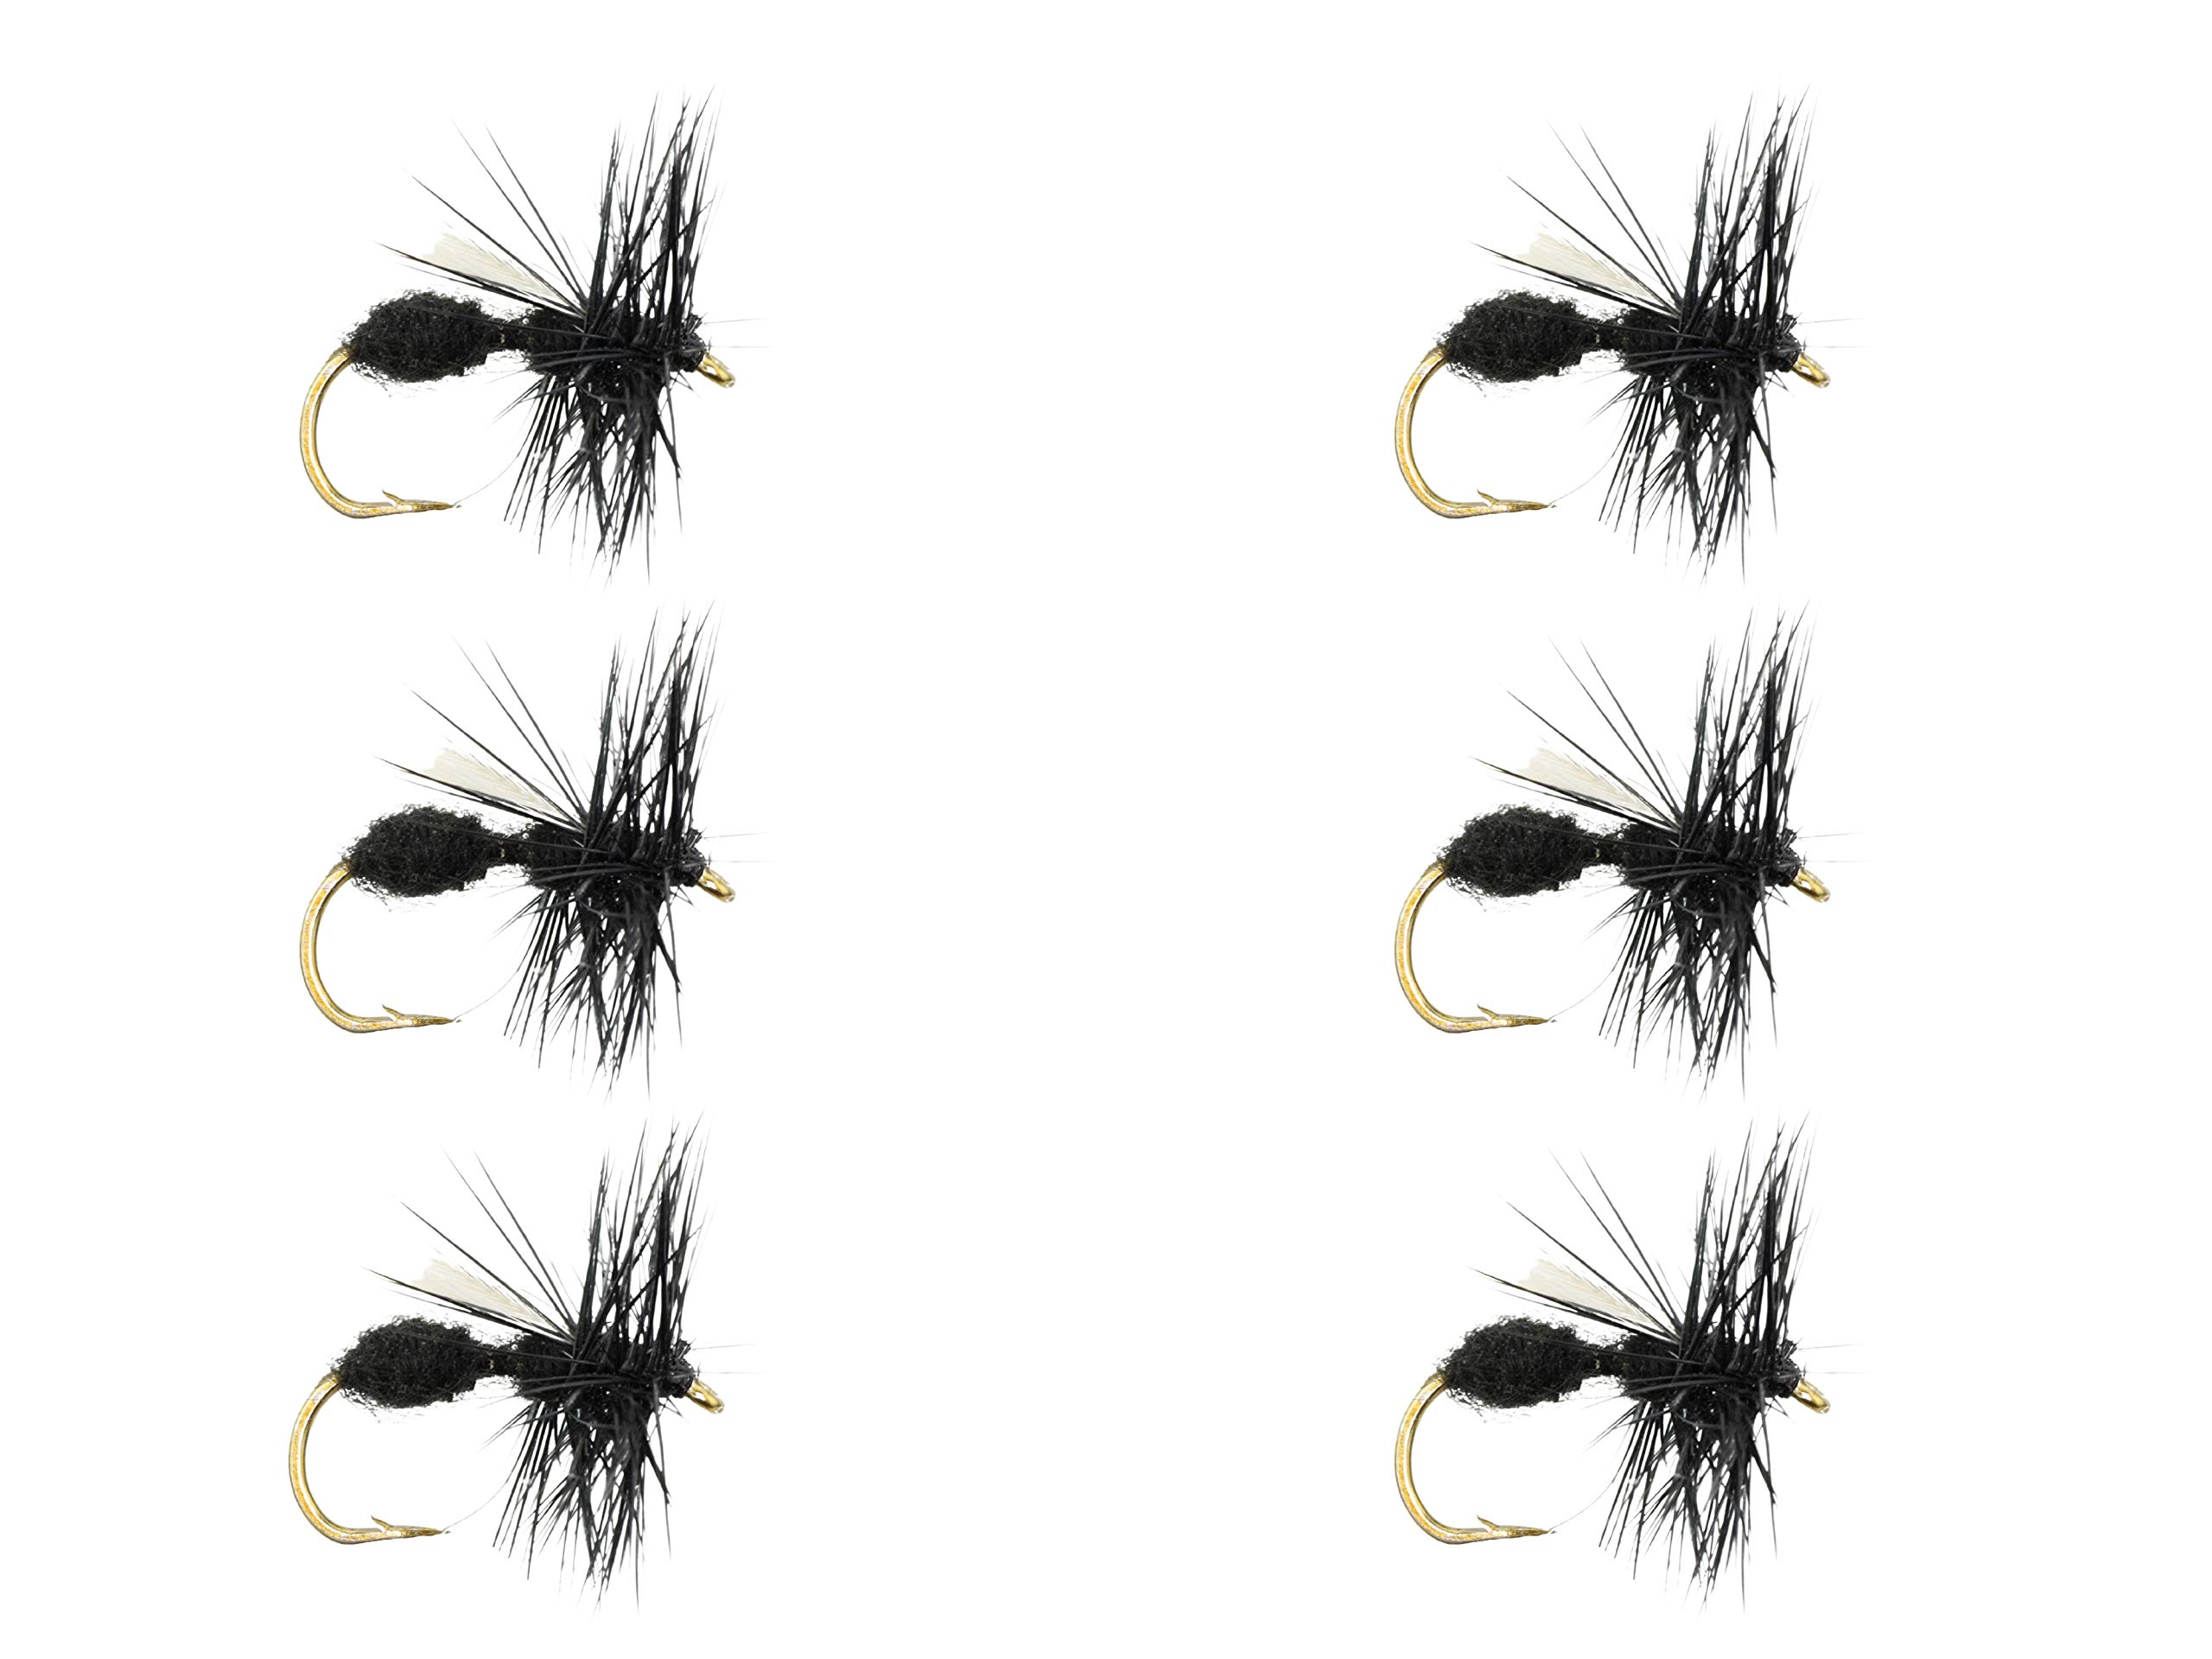 Wild Water Fly Fishing Dry Flies Size 10-14 for Trout, Panfish and Other  Lake & River Fish Black Winged Ant - Size 12 - 6 Pack